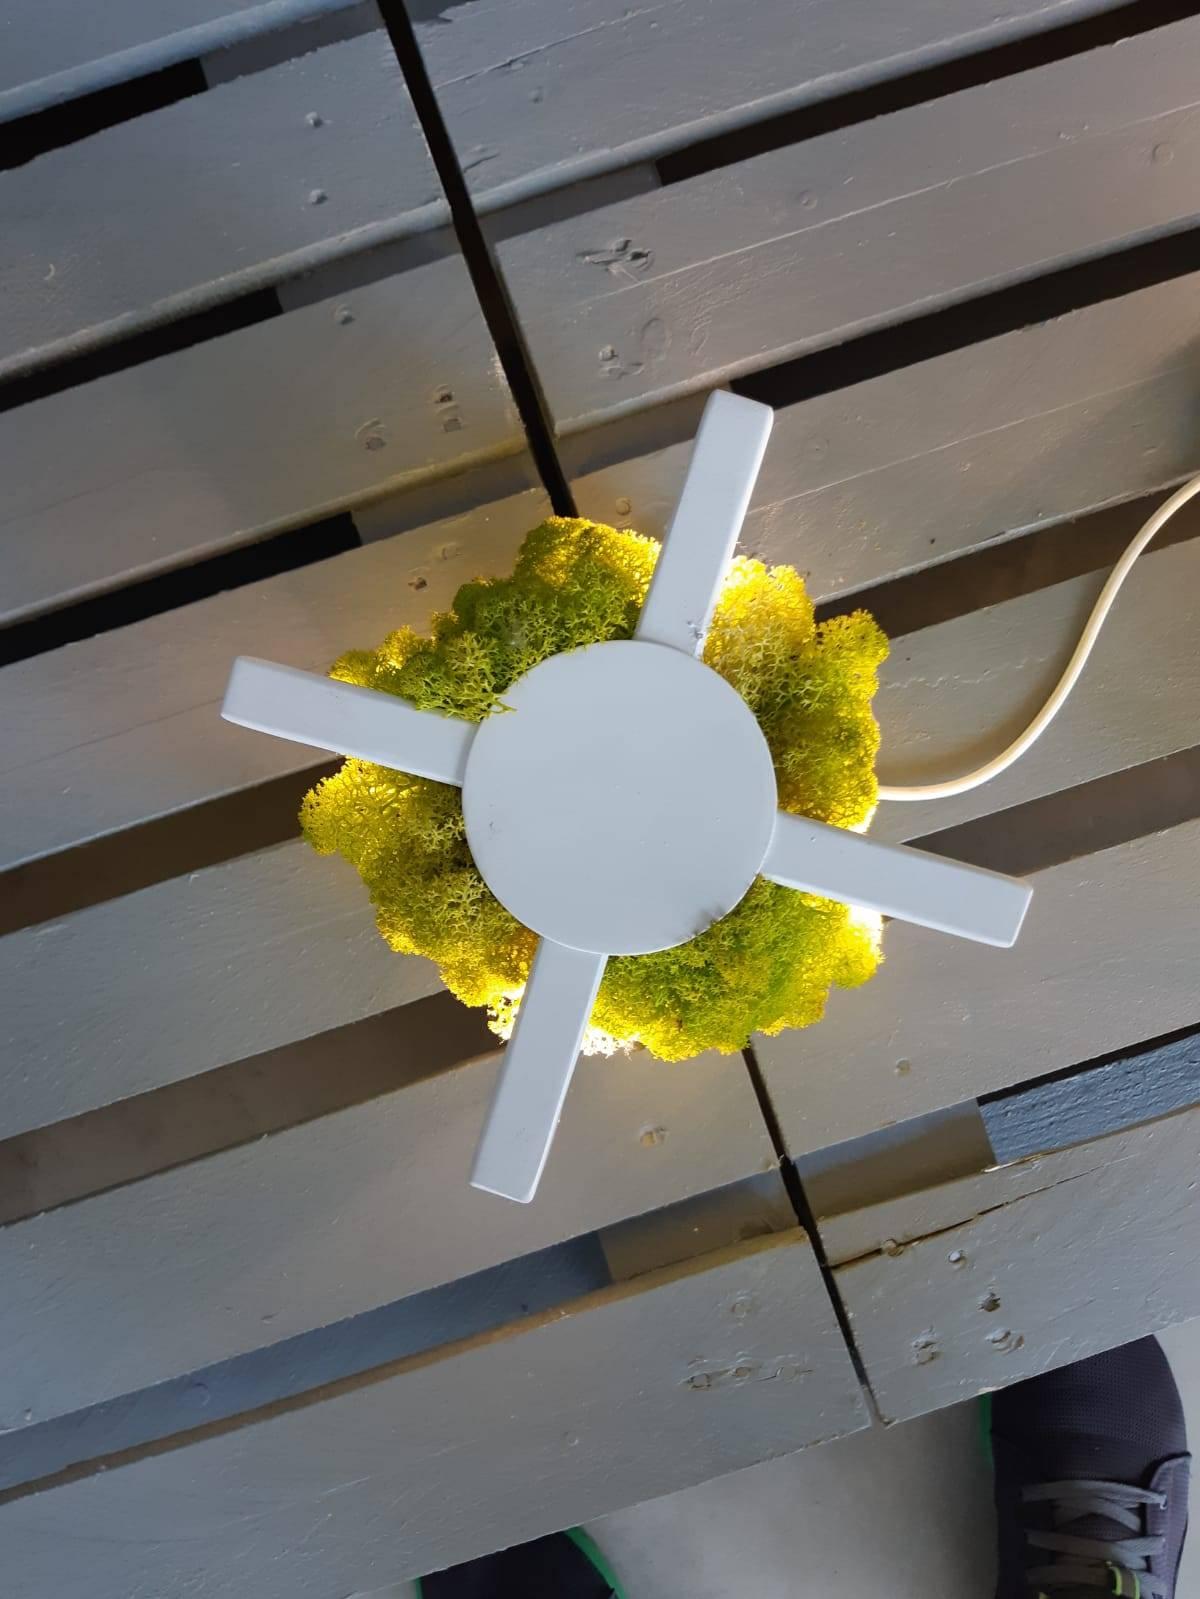 Italian Handmade Ceiling Lamp in Scandinavian Minimalist Style with Natural Moss For Sale 1